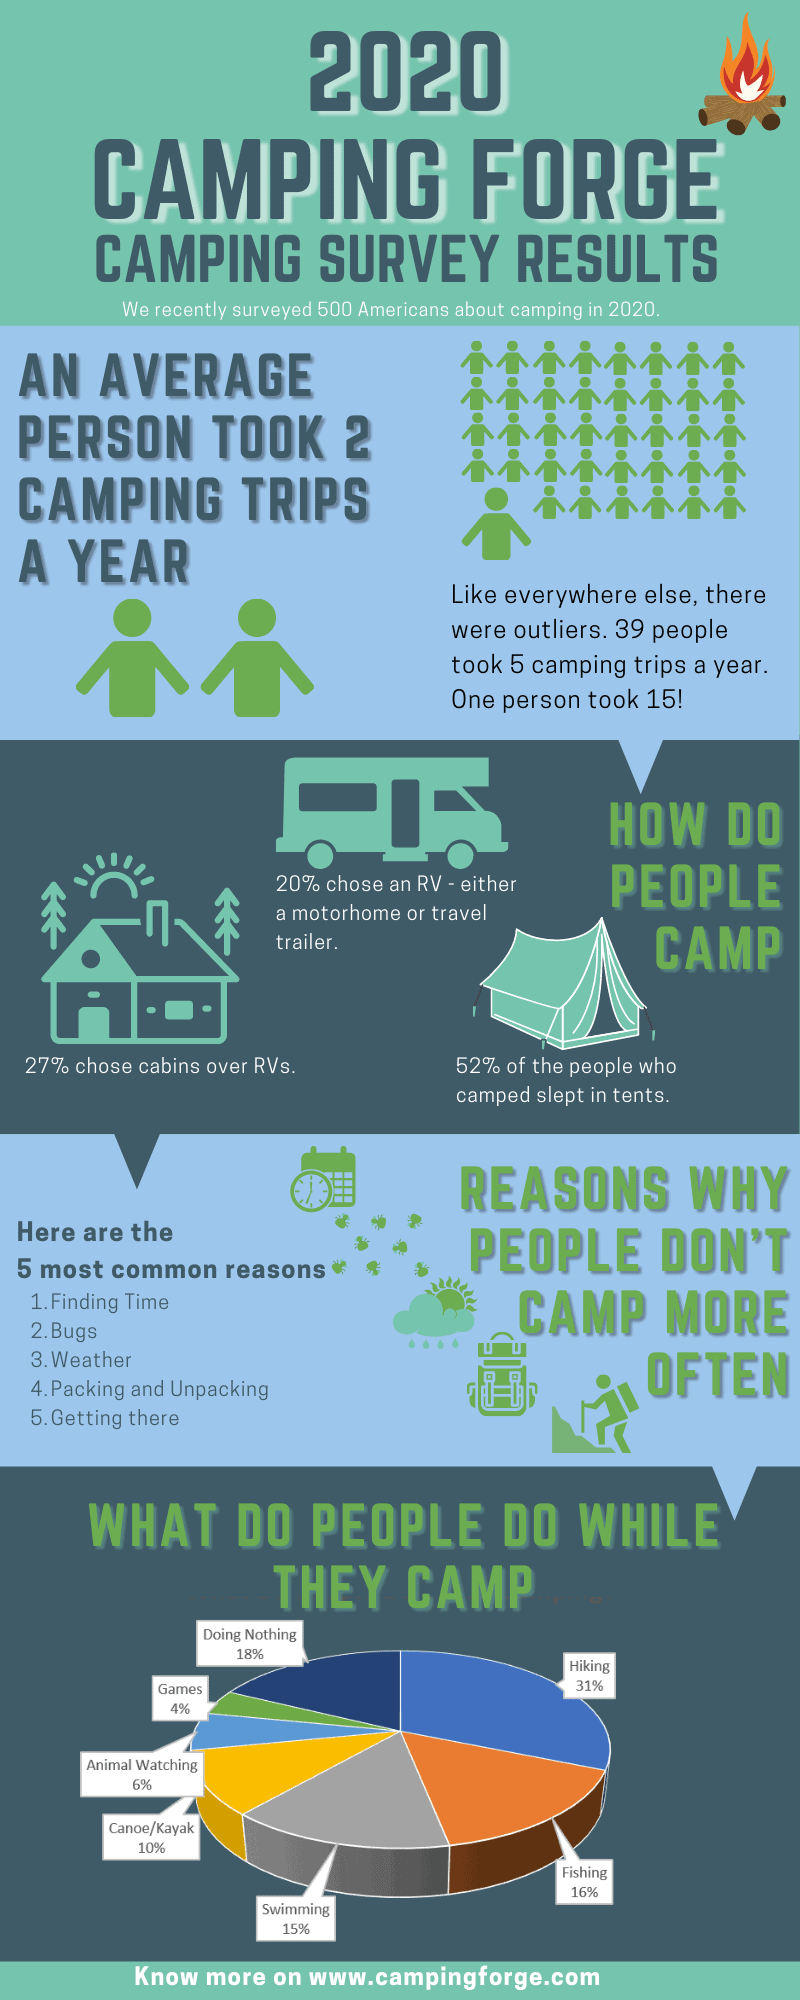 2020 Camping Forge Camping Survey Infographic